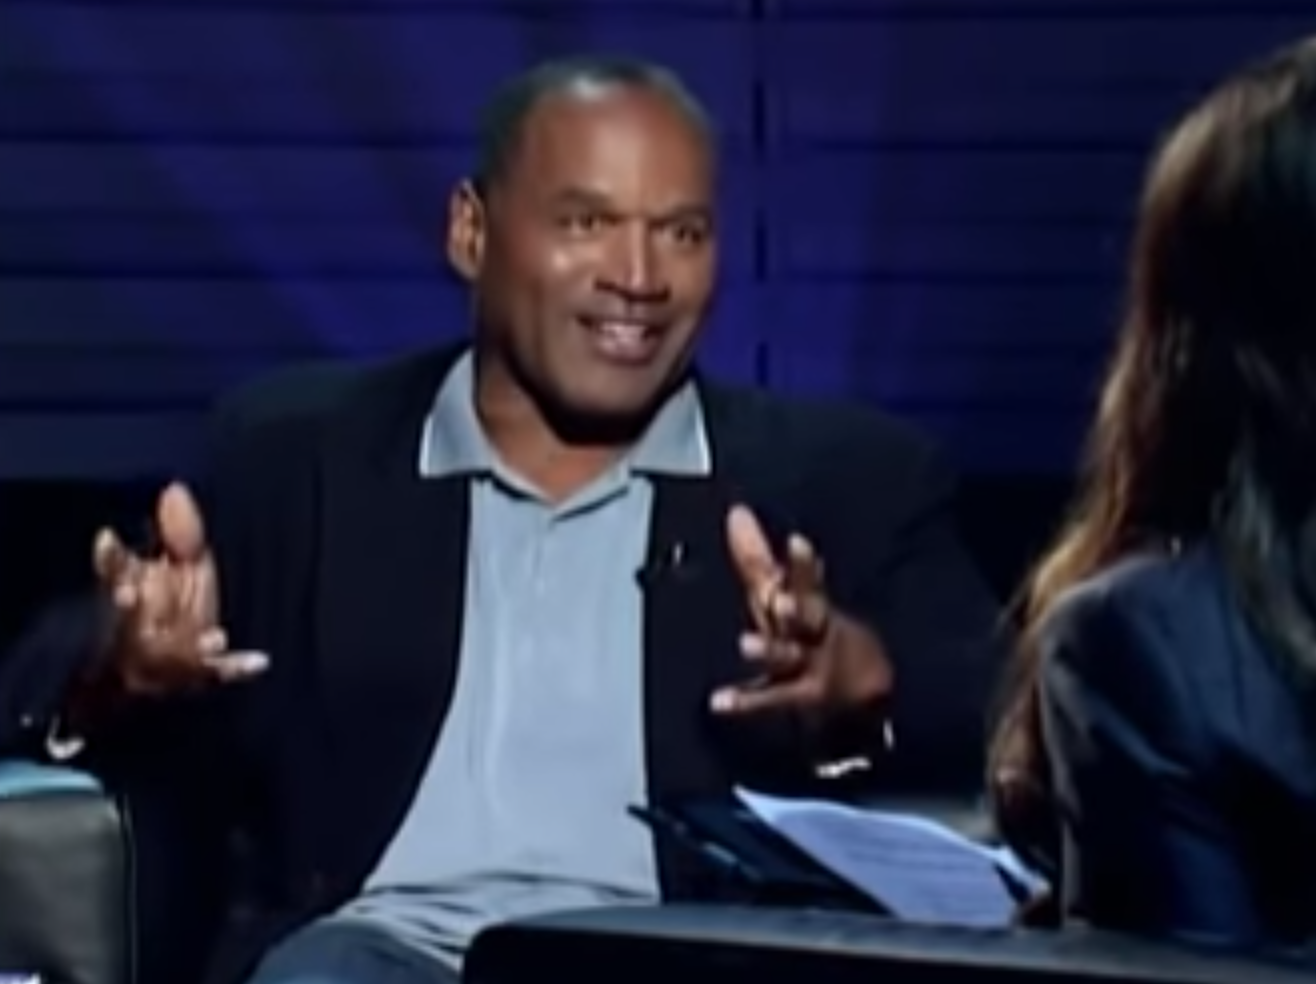 Body Language Emotional Intelligence Body Language Analysis No 4238 Oj Simpson The Lost Confession Continued Part Ii Nonverbal And Emotional Intelligence Video Photos